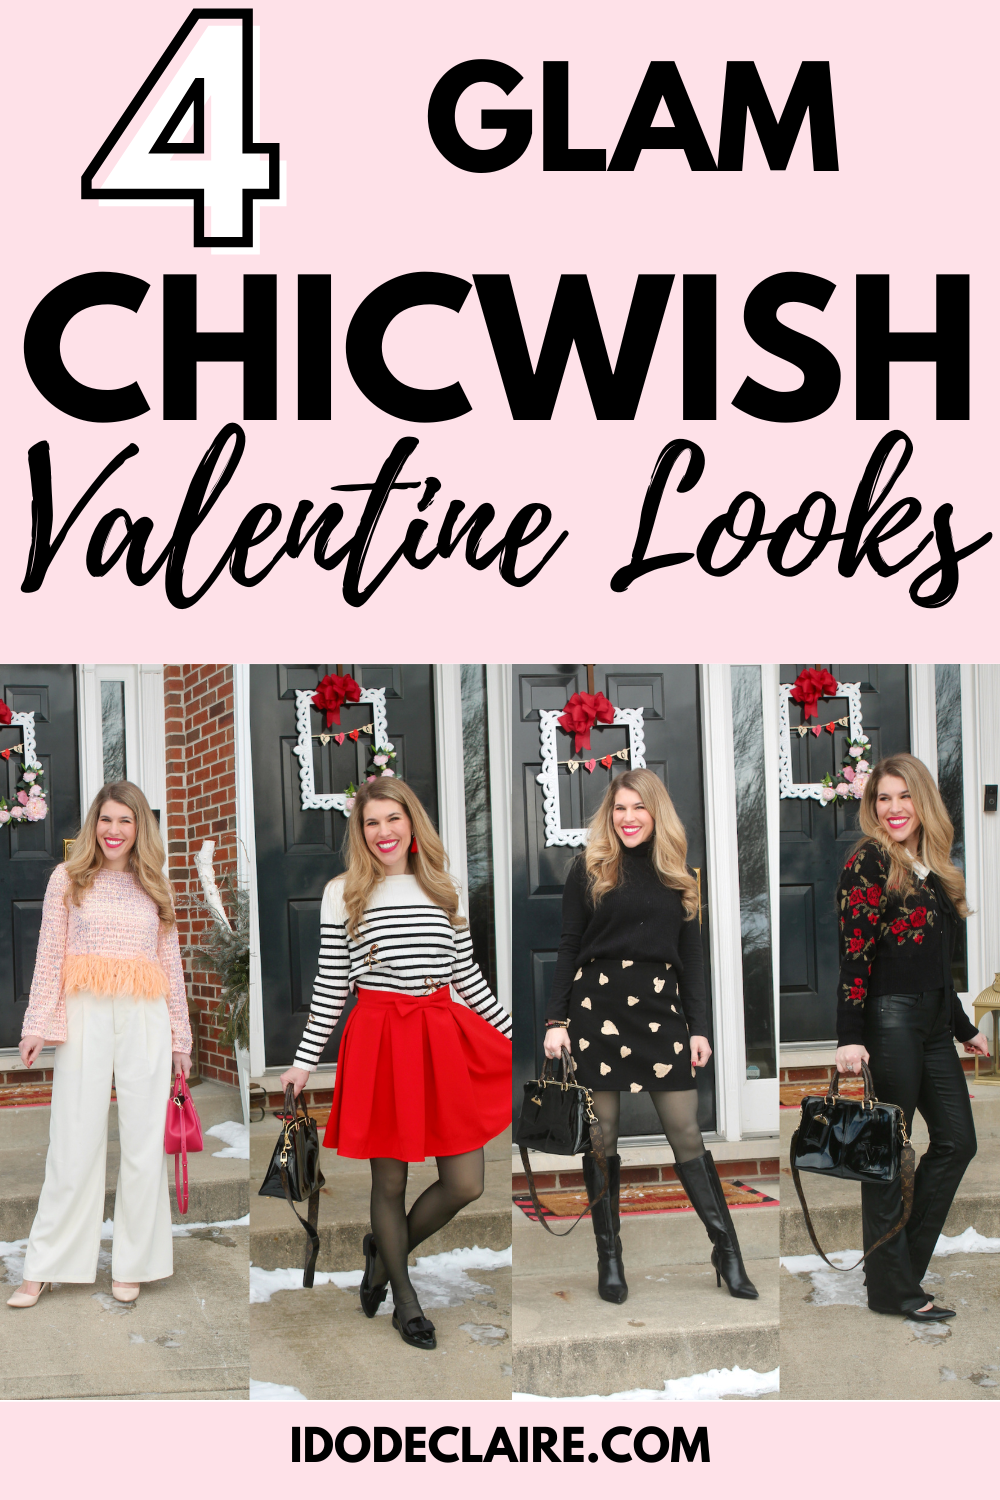 I'm Heart for Chicwish & Confident Twosday Linkup